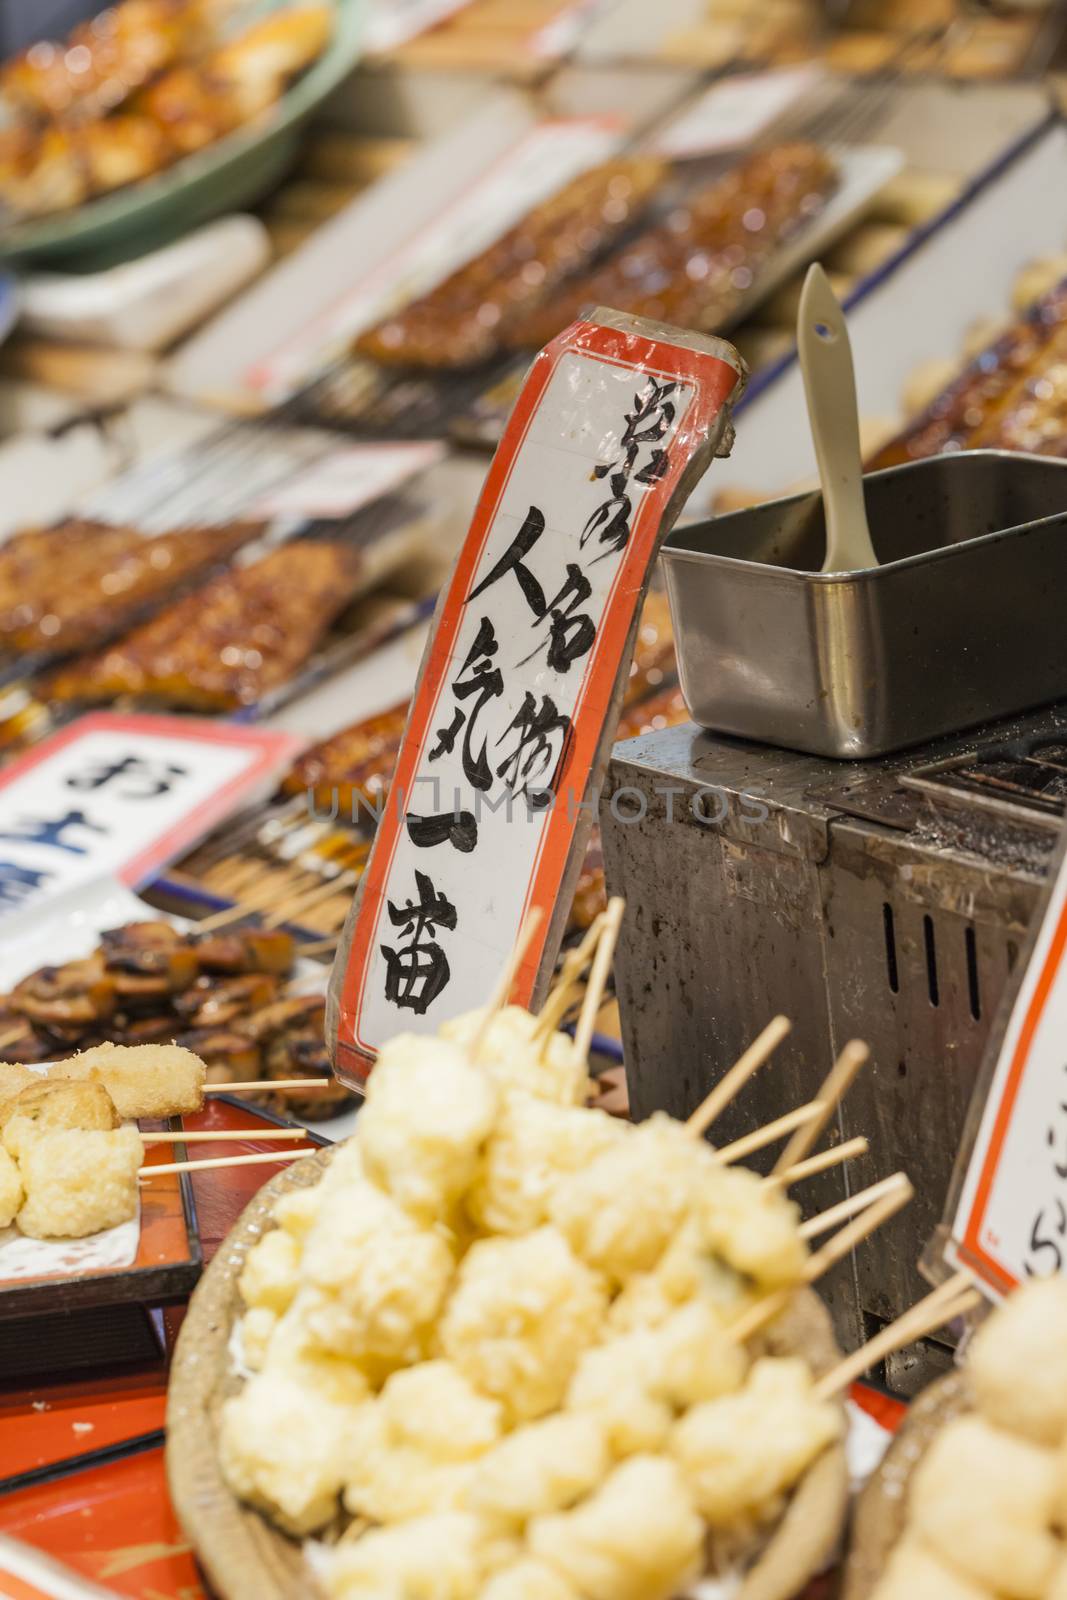 Traditional food market in Kyoto. Japan.